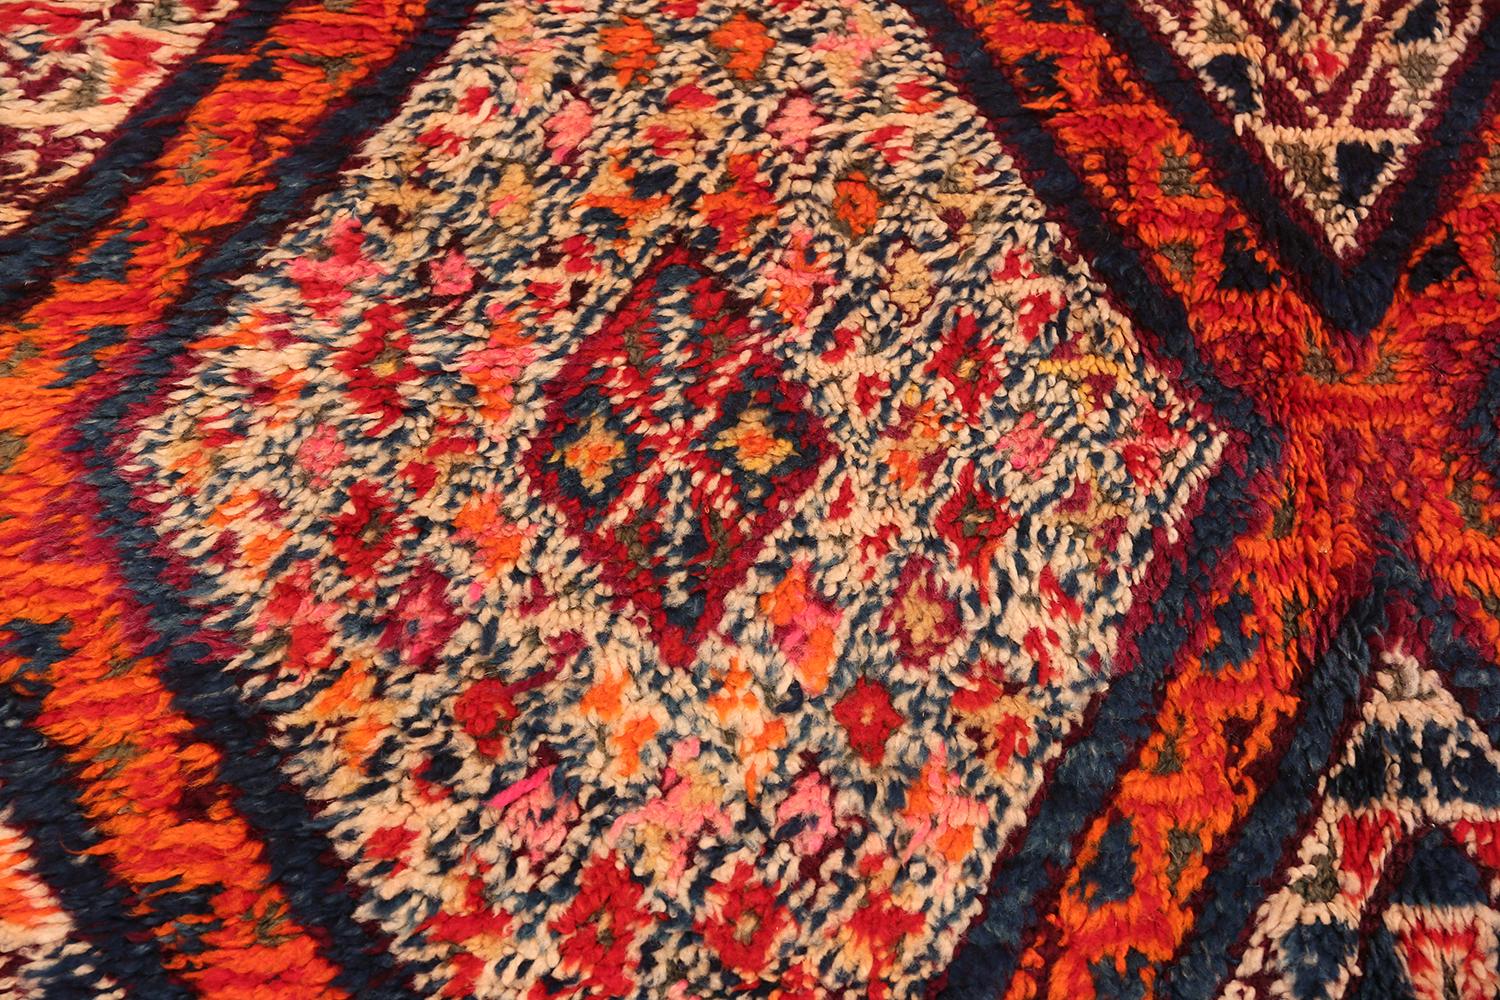 Hand-Knotted Folk Art Vintage Geometric Moroccan Rug. Size: 6 ft. 4 in x 9 ft. 9 in